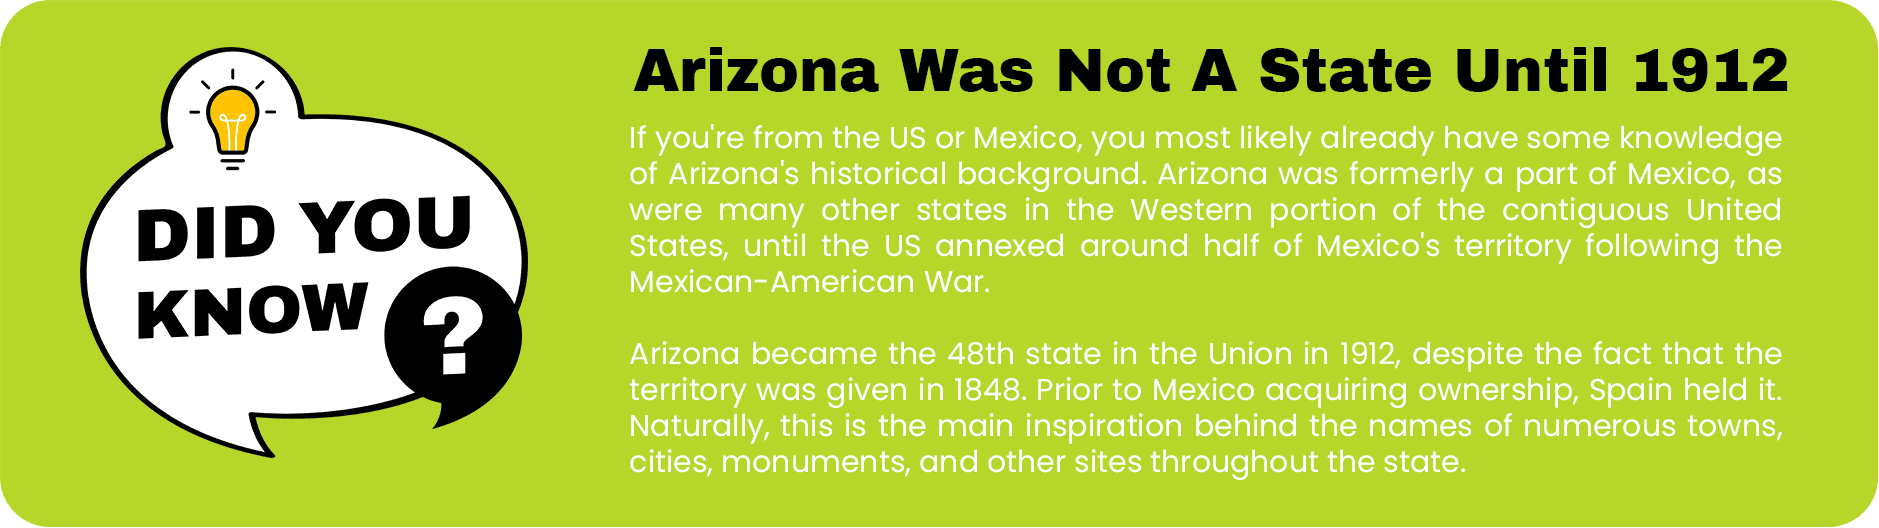 Informational graphic highlighting that Arizona became a state in 1912 with preferred historical context about its territorial status before statehood.